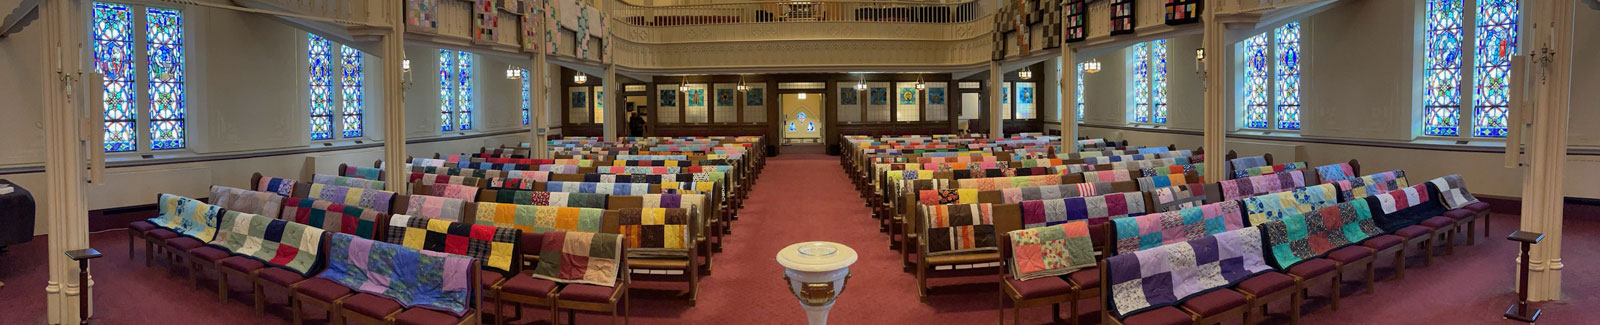 Photo of pews with quilts covering them